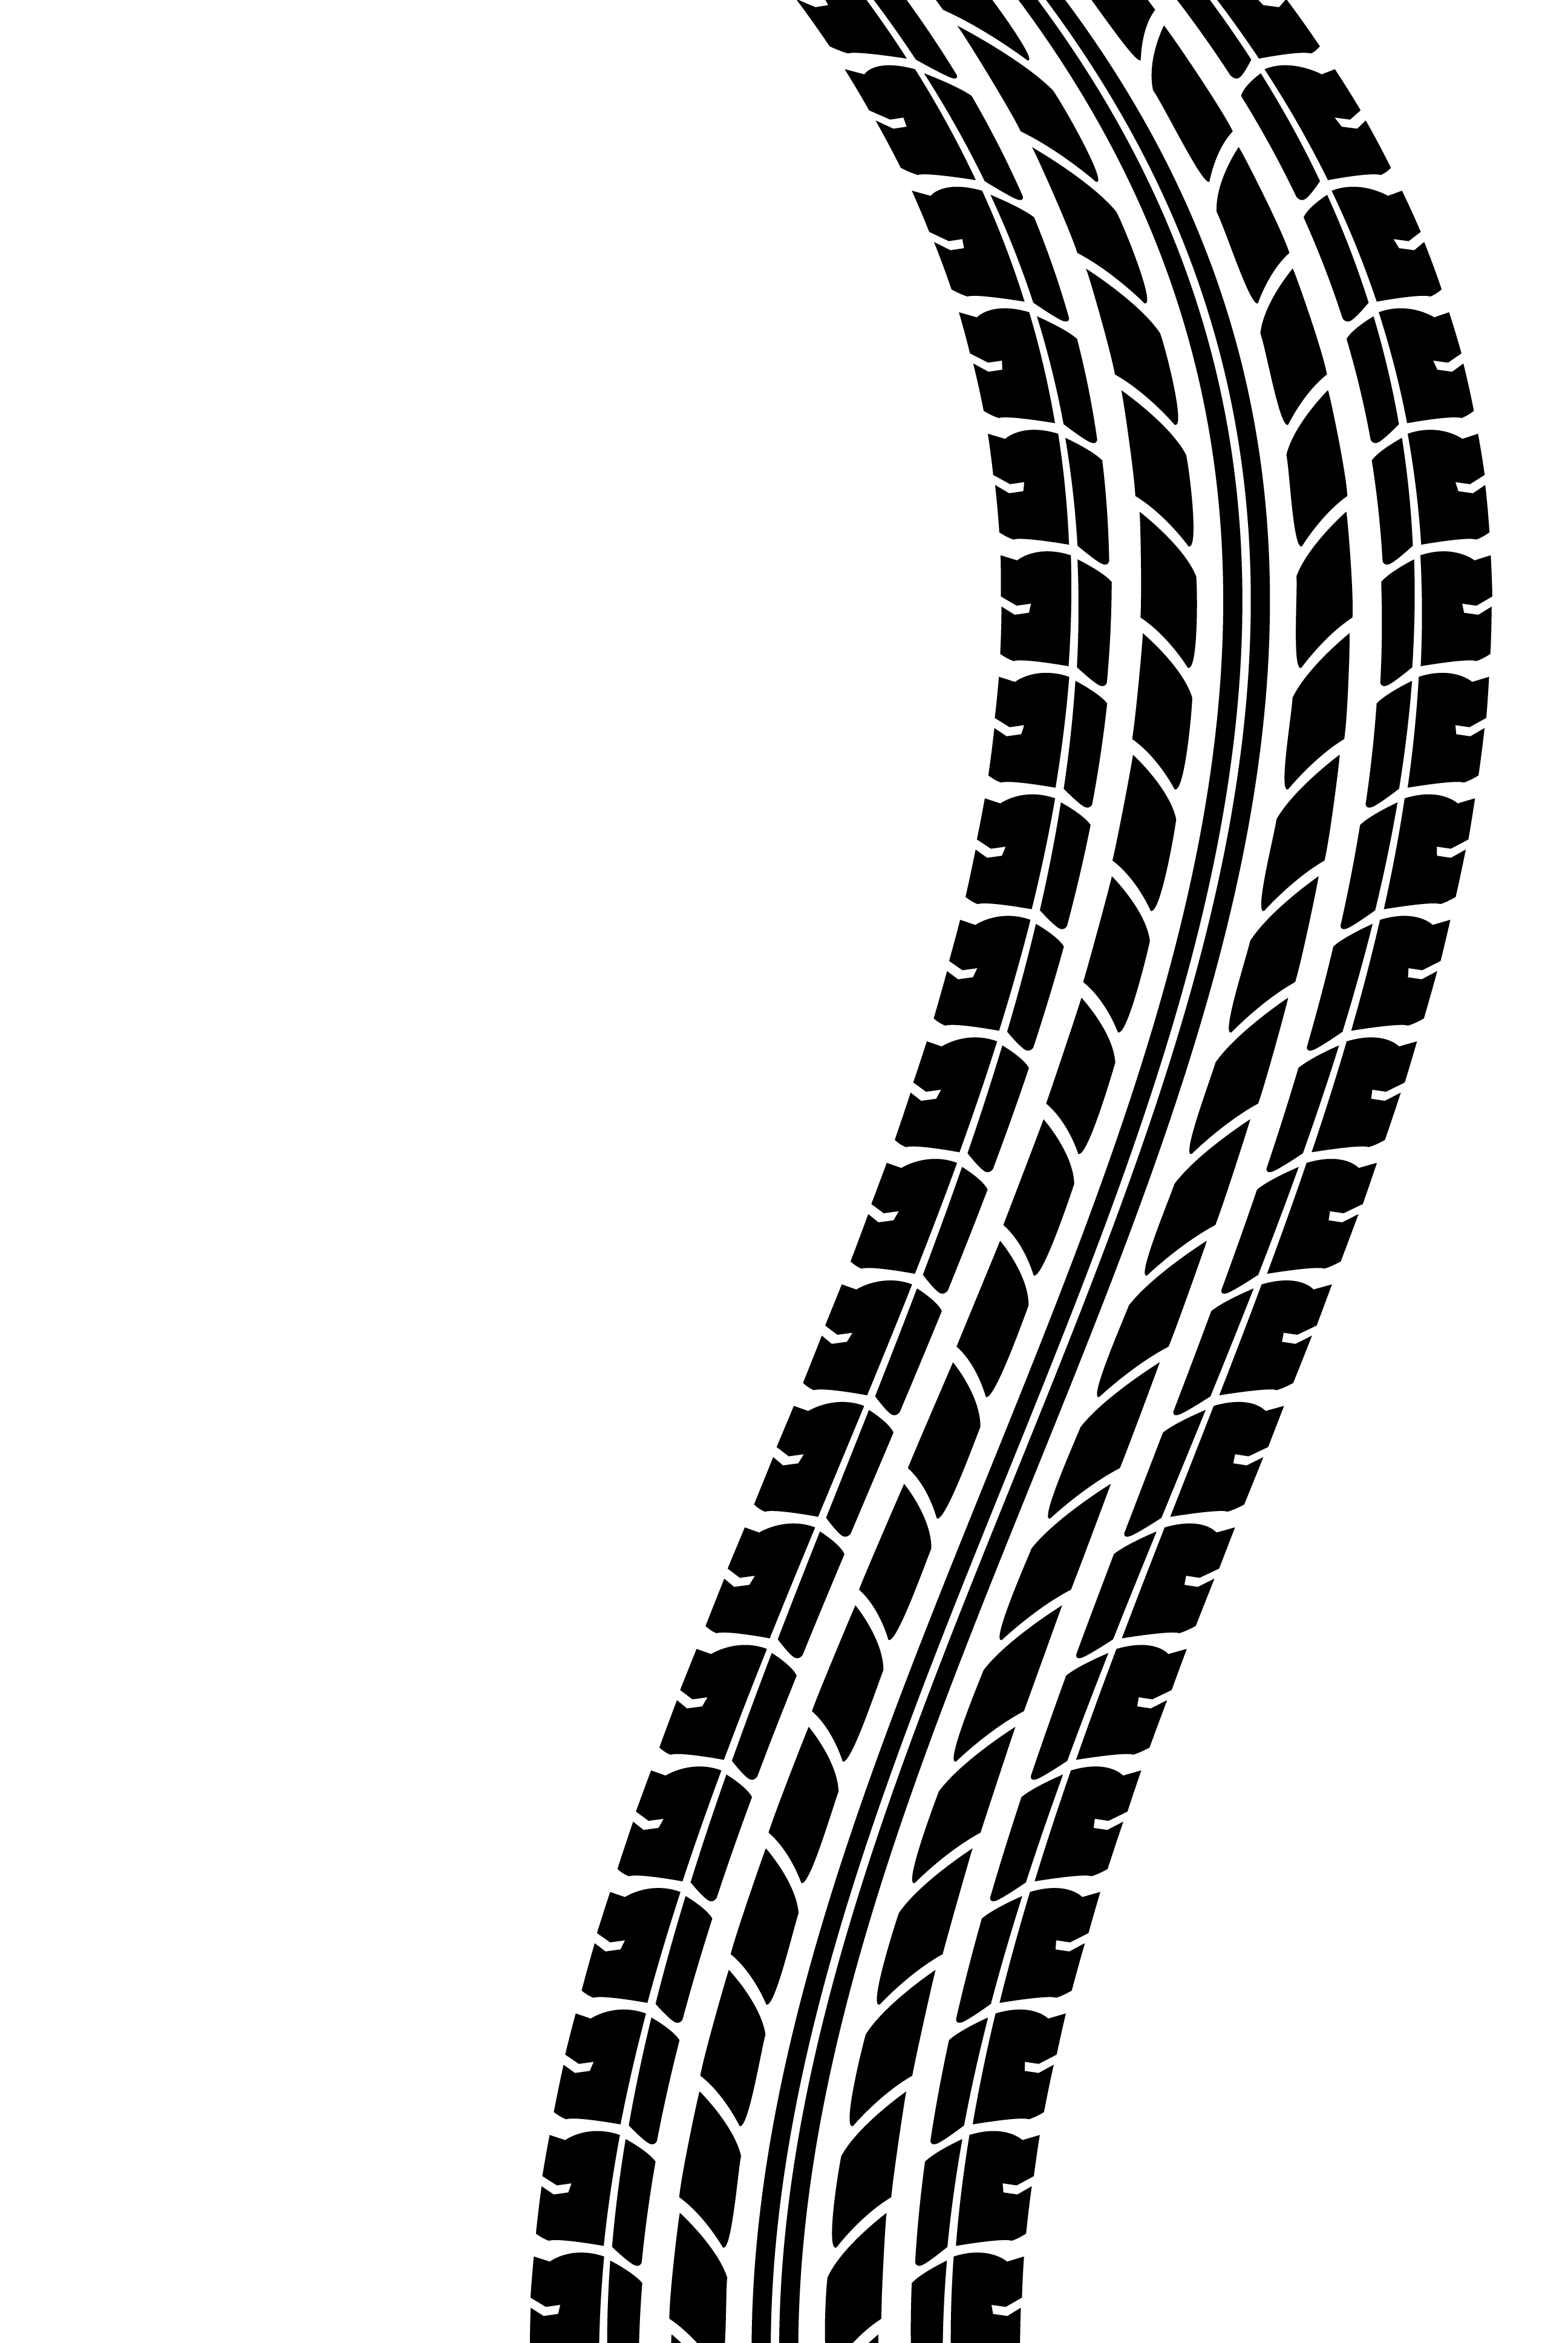 tyre tracks clip art - group picture, image by tag - keywordpictures.